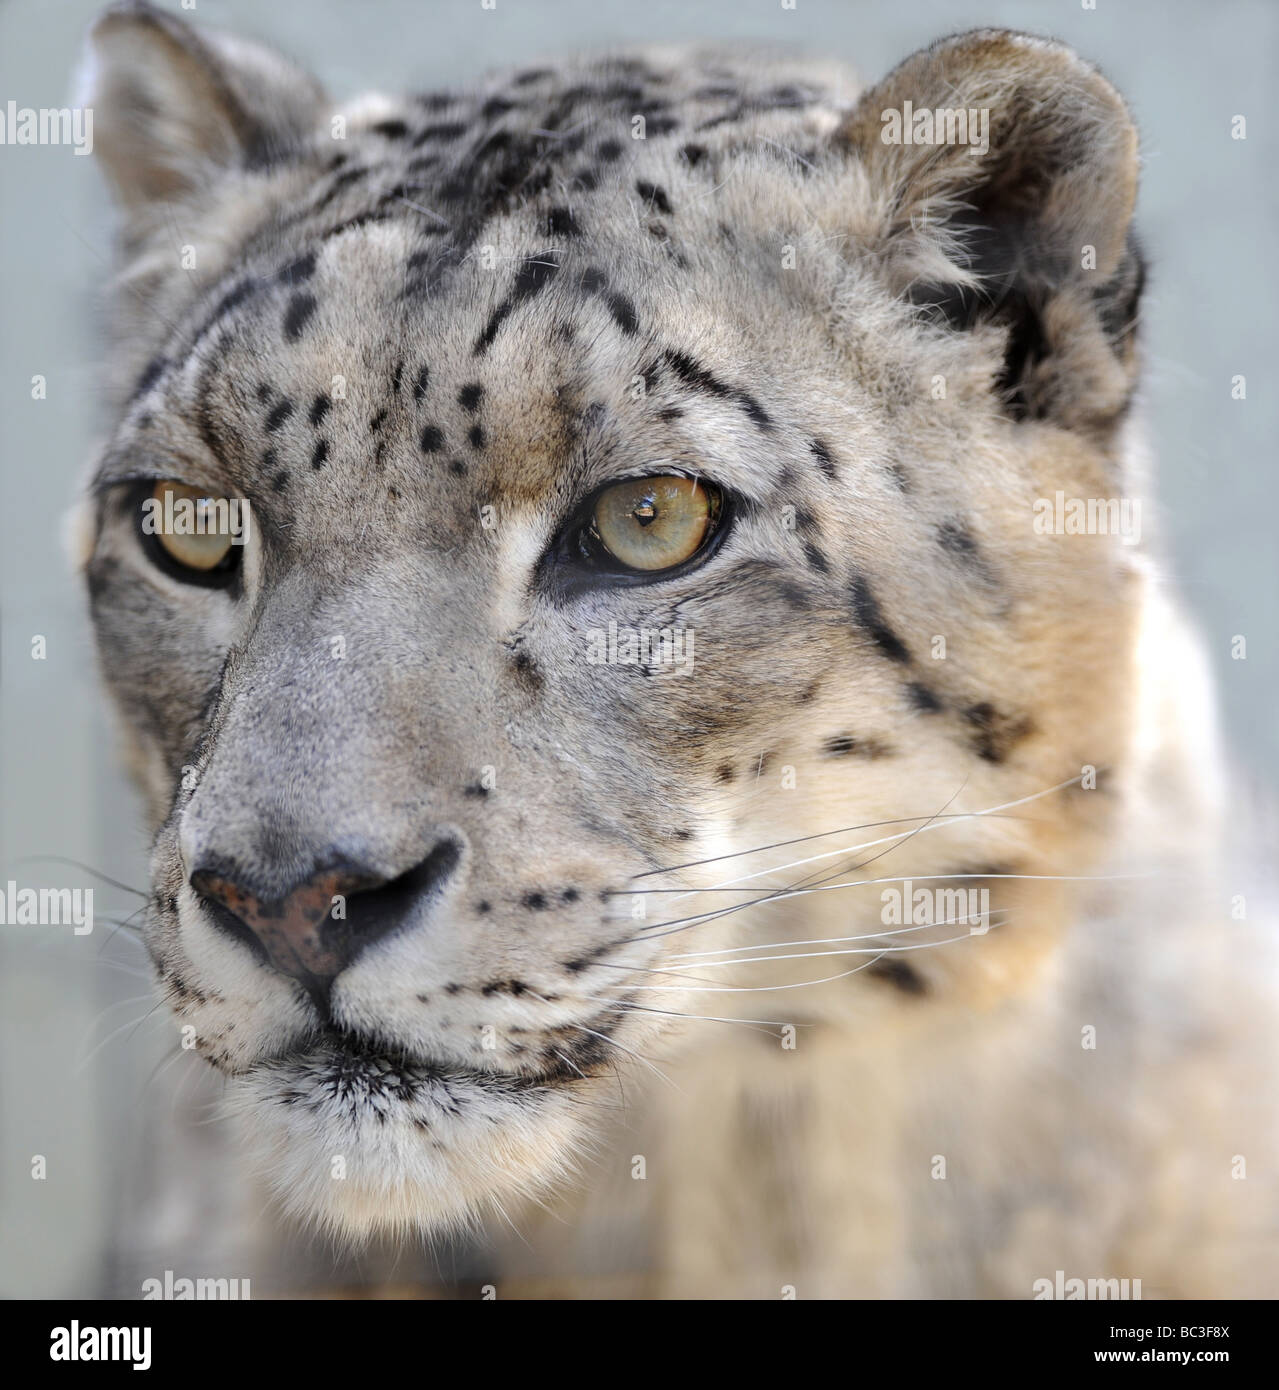 close up full frame of magnificent snow leopard normally found in mountaneous central asia Stock Photo